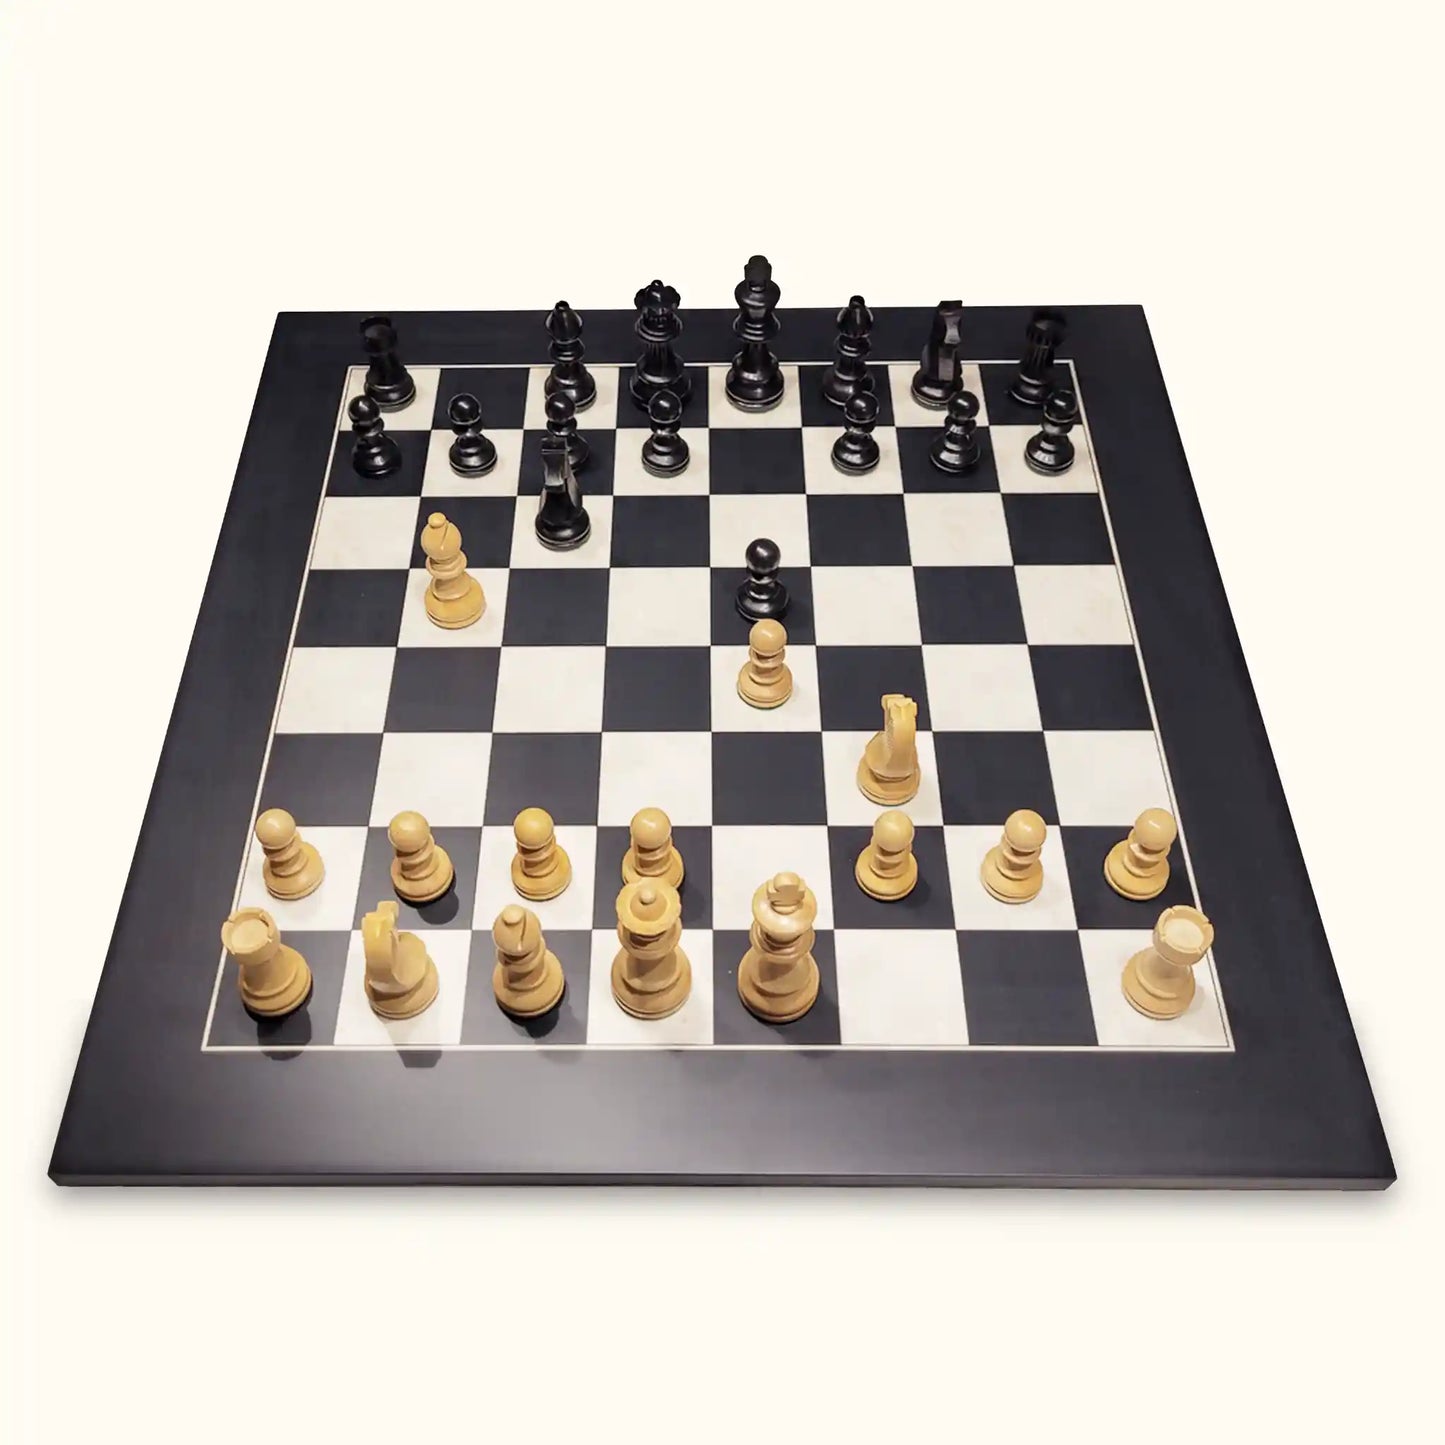 Chessboard black deluxe with chess pieces german knight top